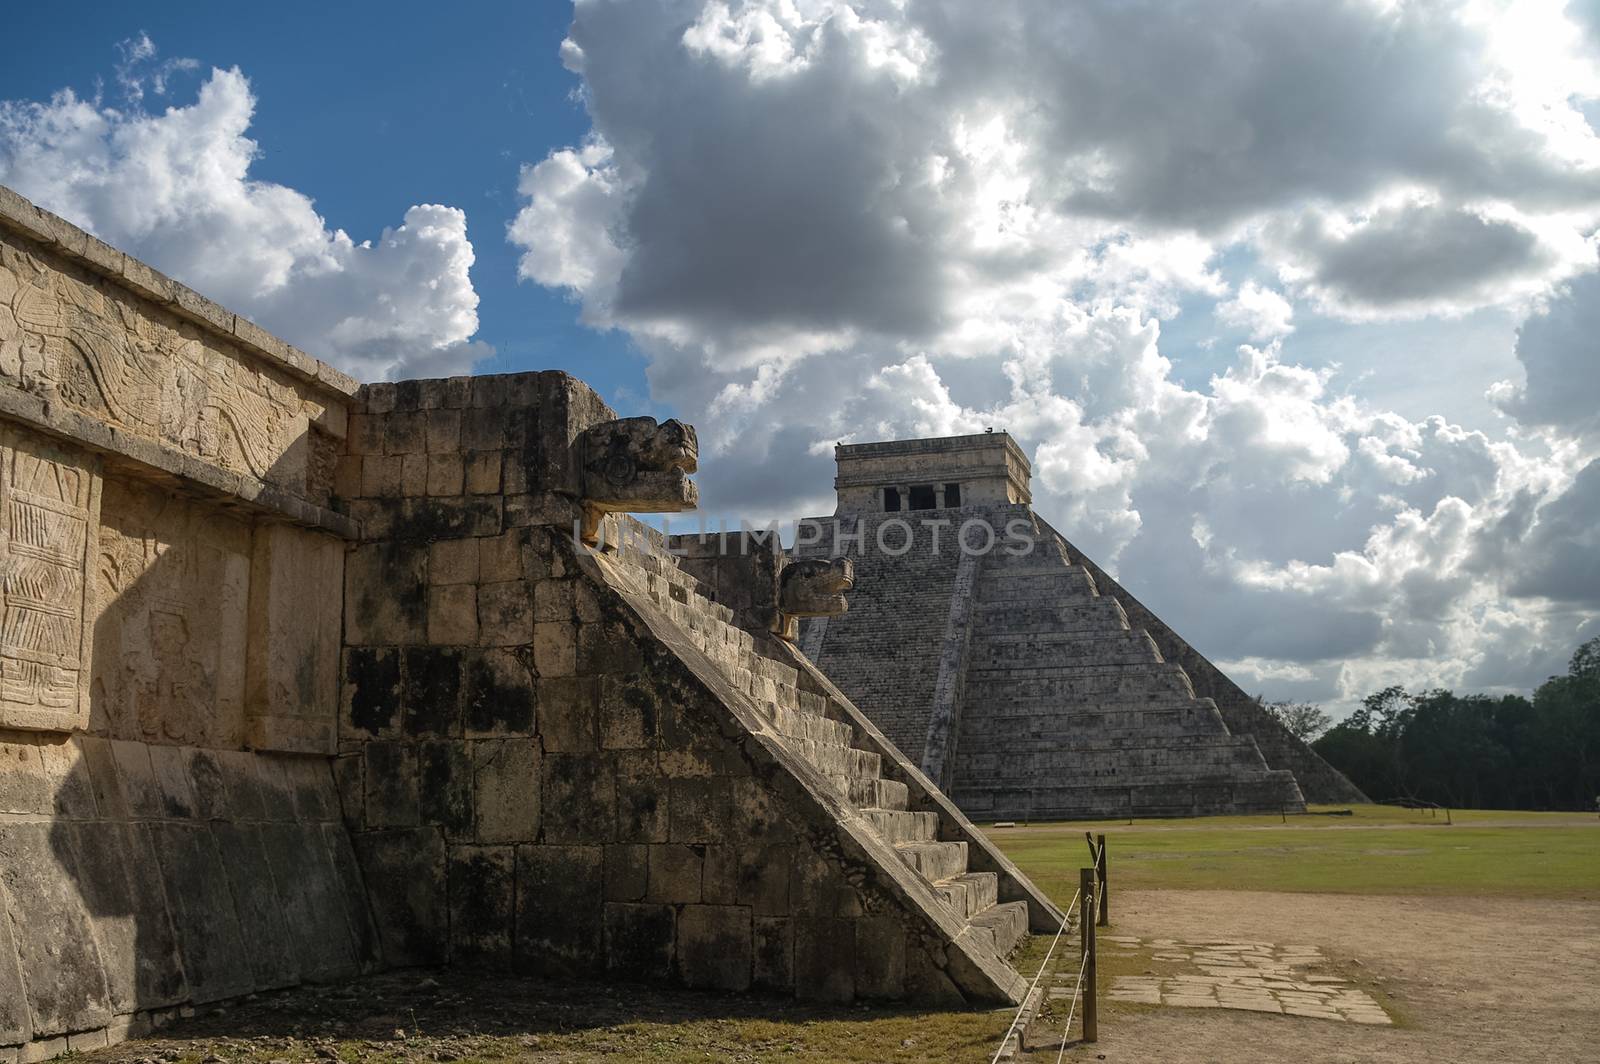 Mayan Pyramid of Kukulkan "El Castillo" as seen from the Platform of the Eagles and the Jaguars, Chichen Itza, Mexico.